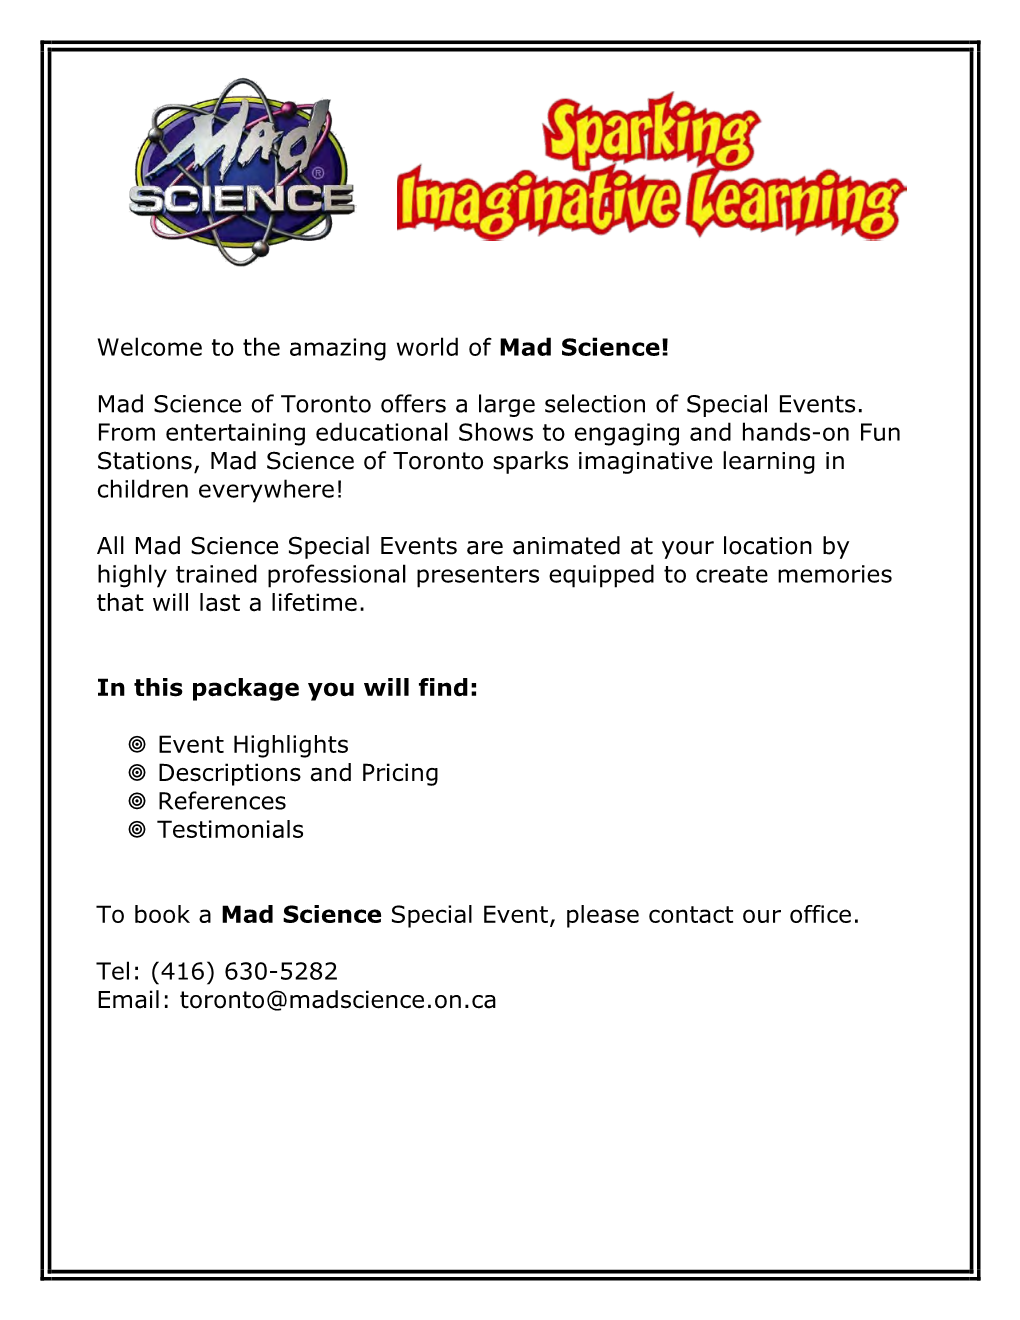 Mad Science of Toronto Offers a Large Selection of Special Events. From